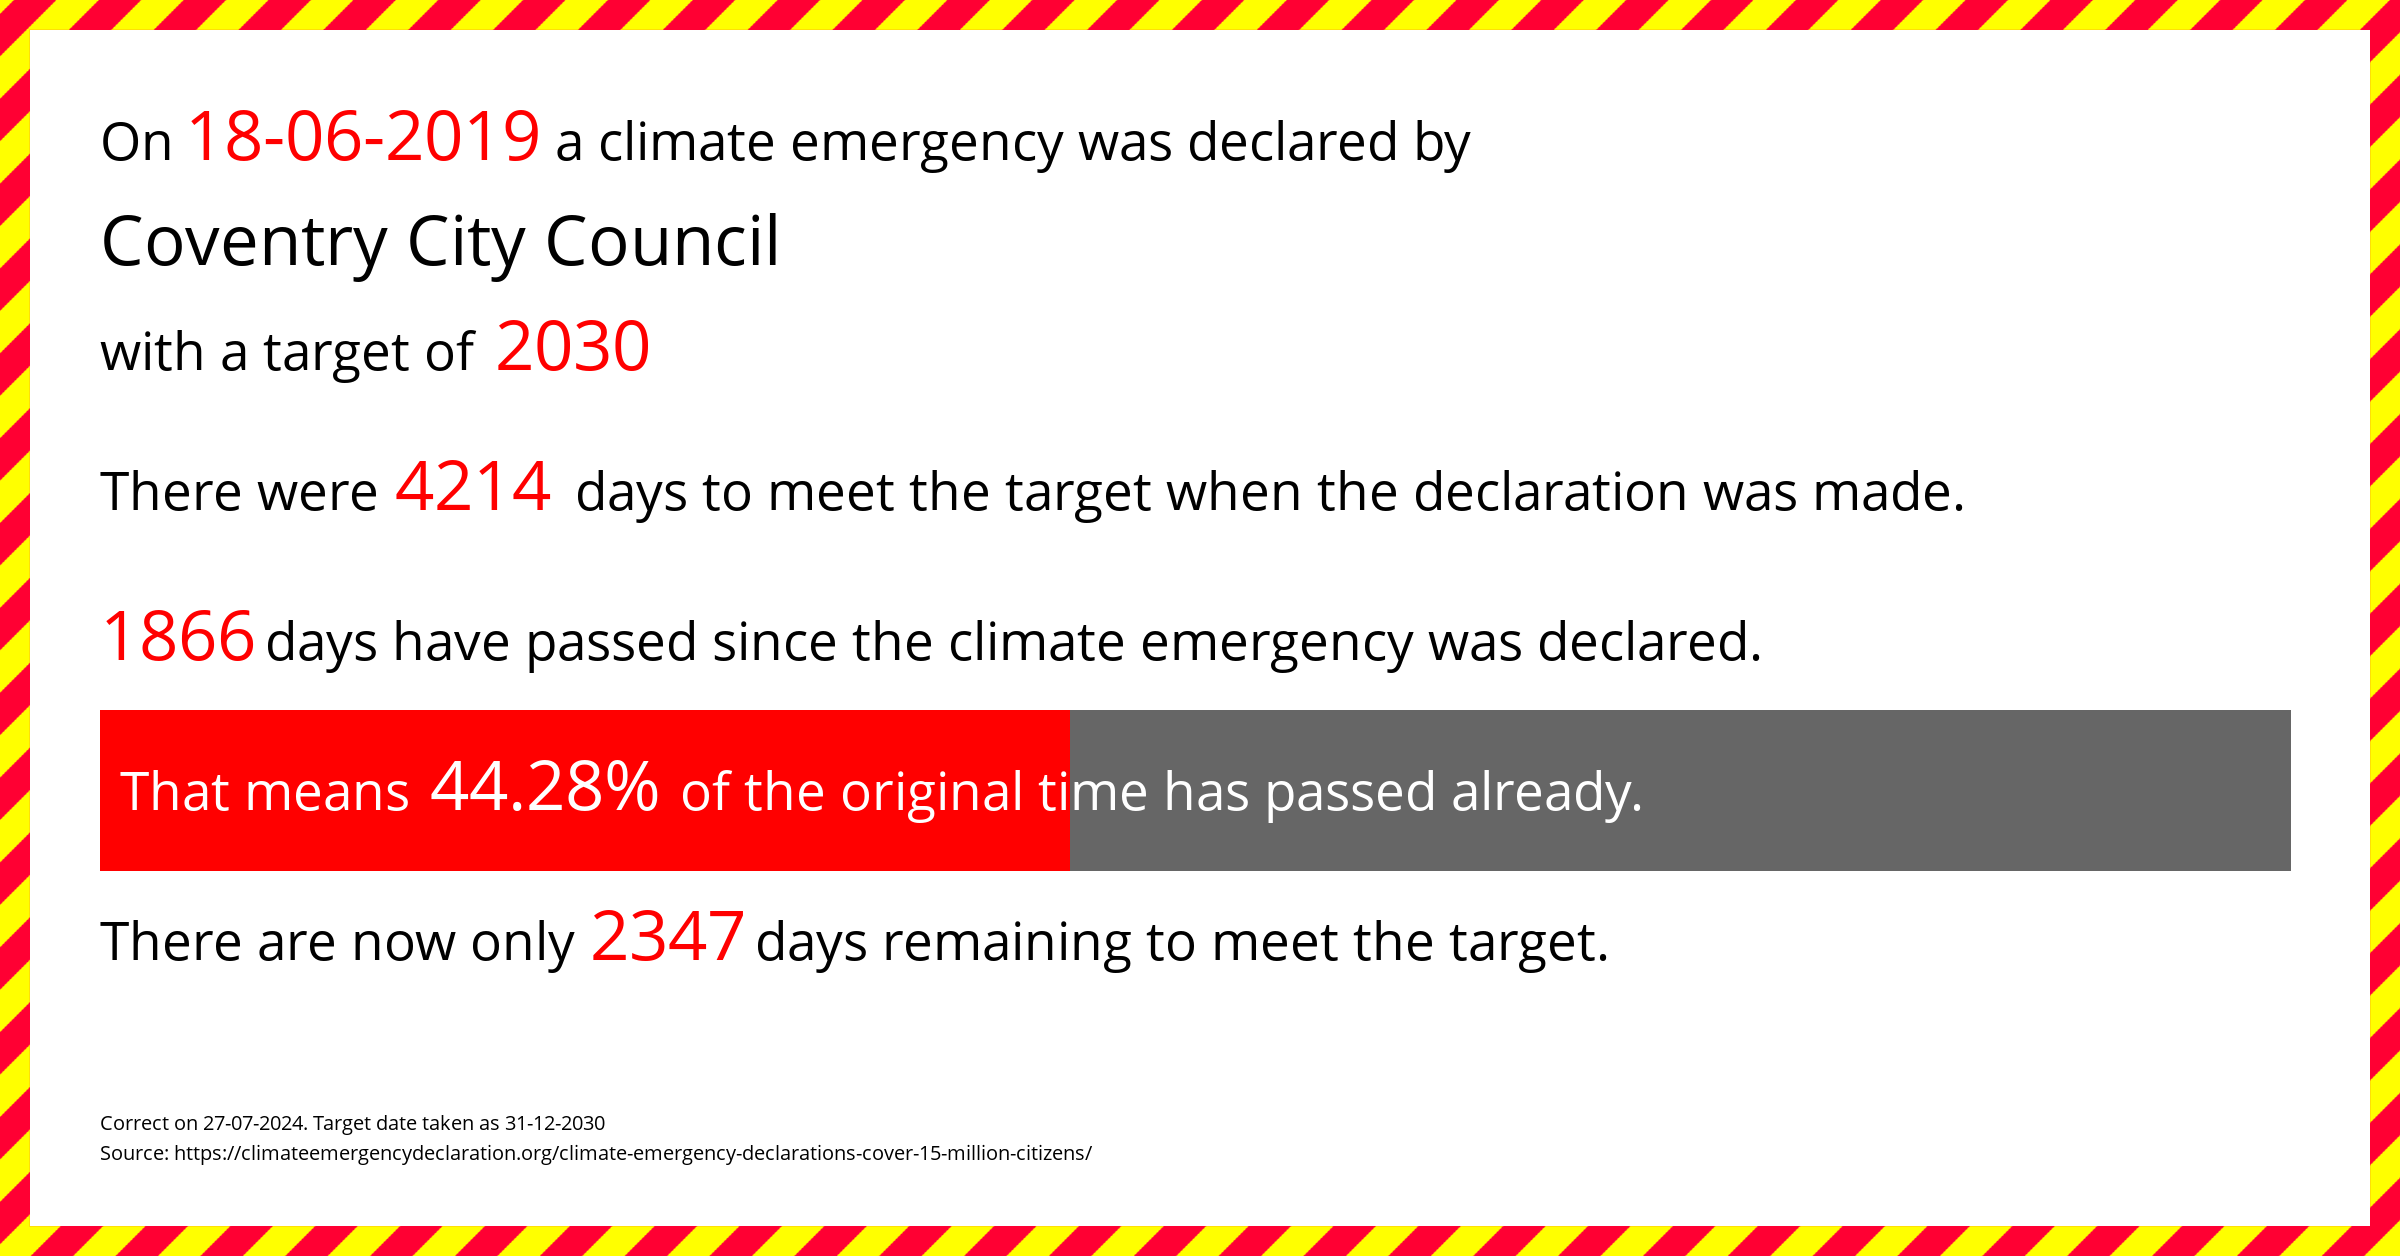 Coventry City Council declared a Climate emergency on Tuesday 18th June 2019, with a target of 2030.